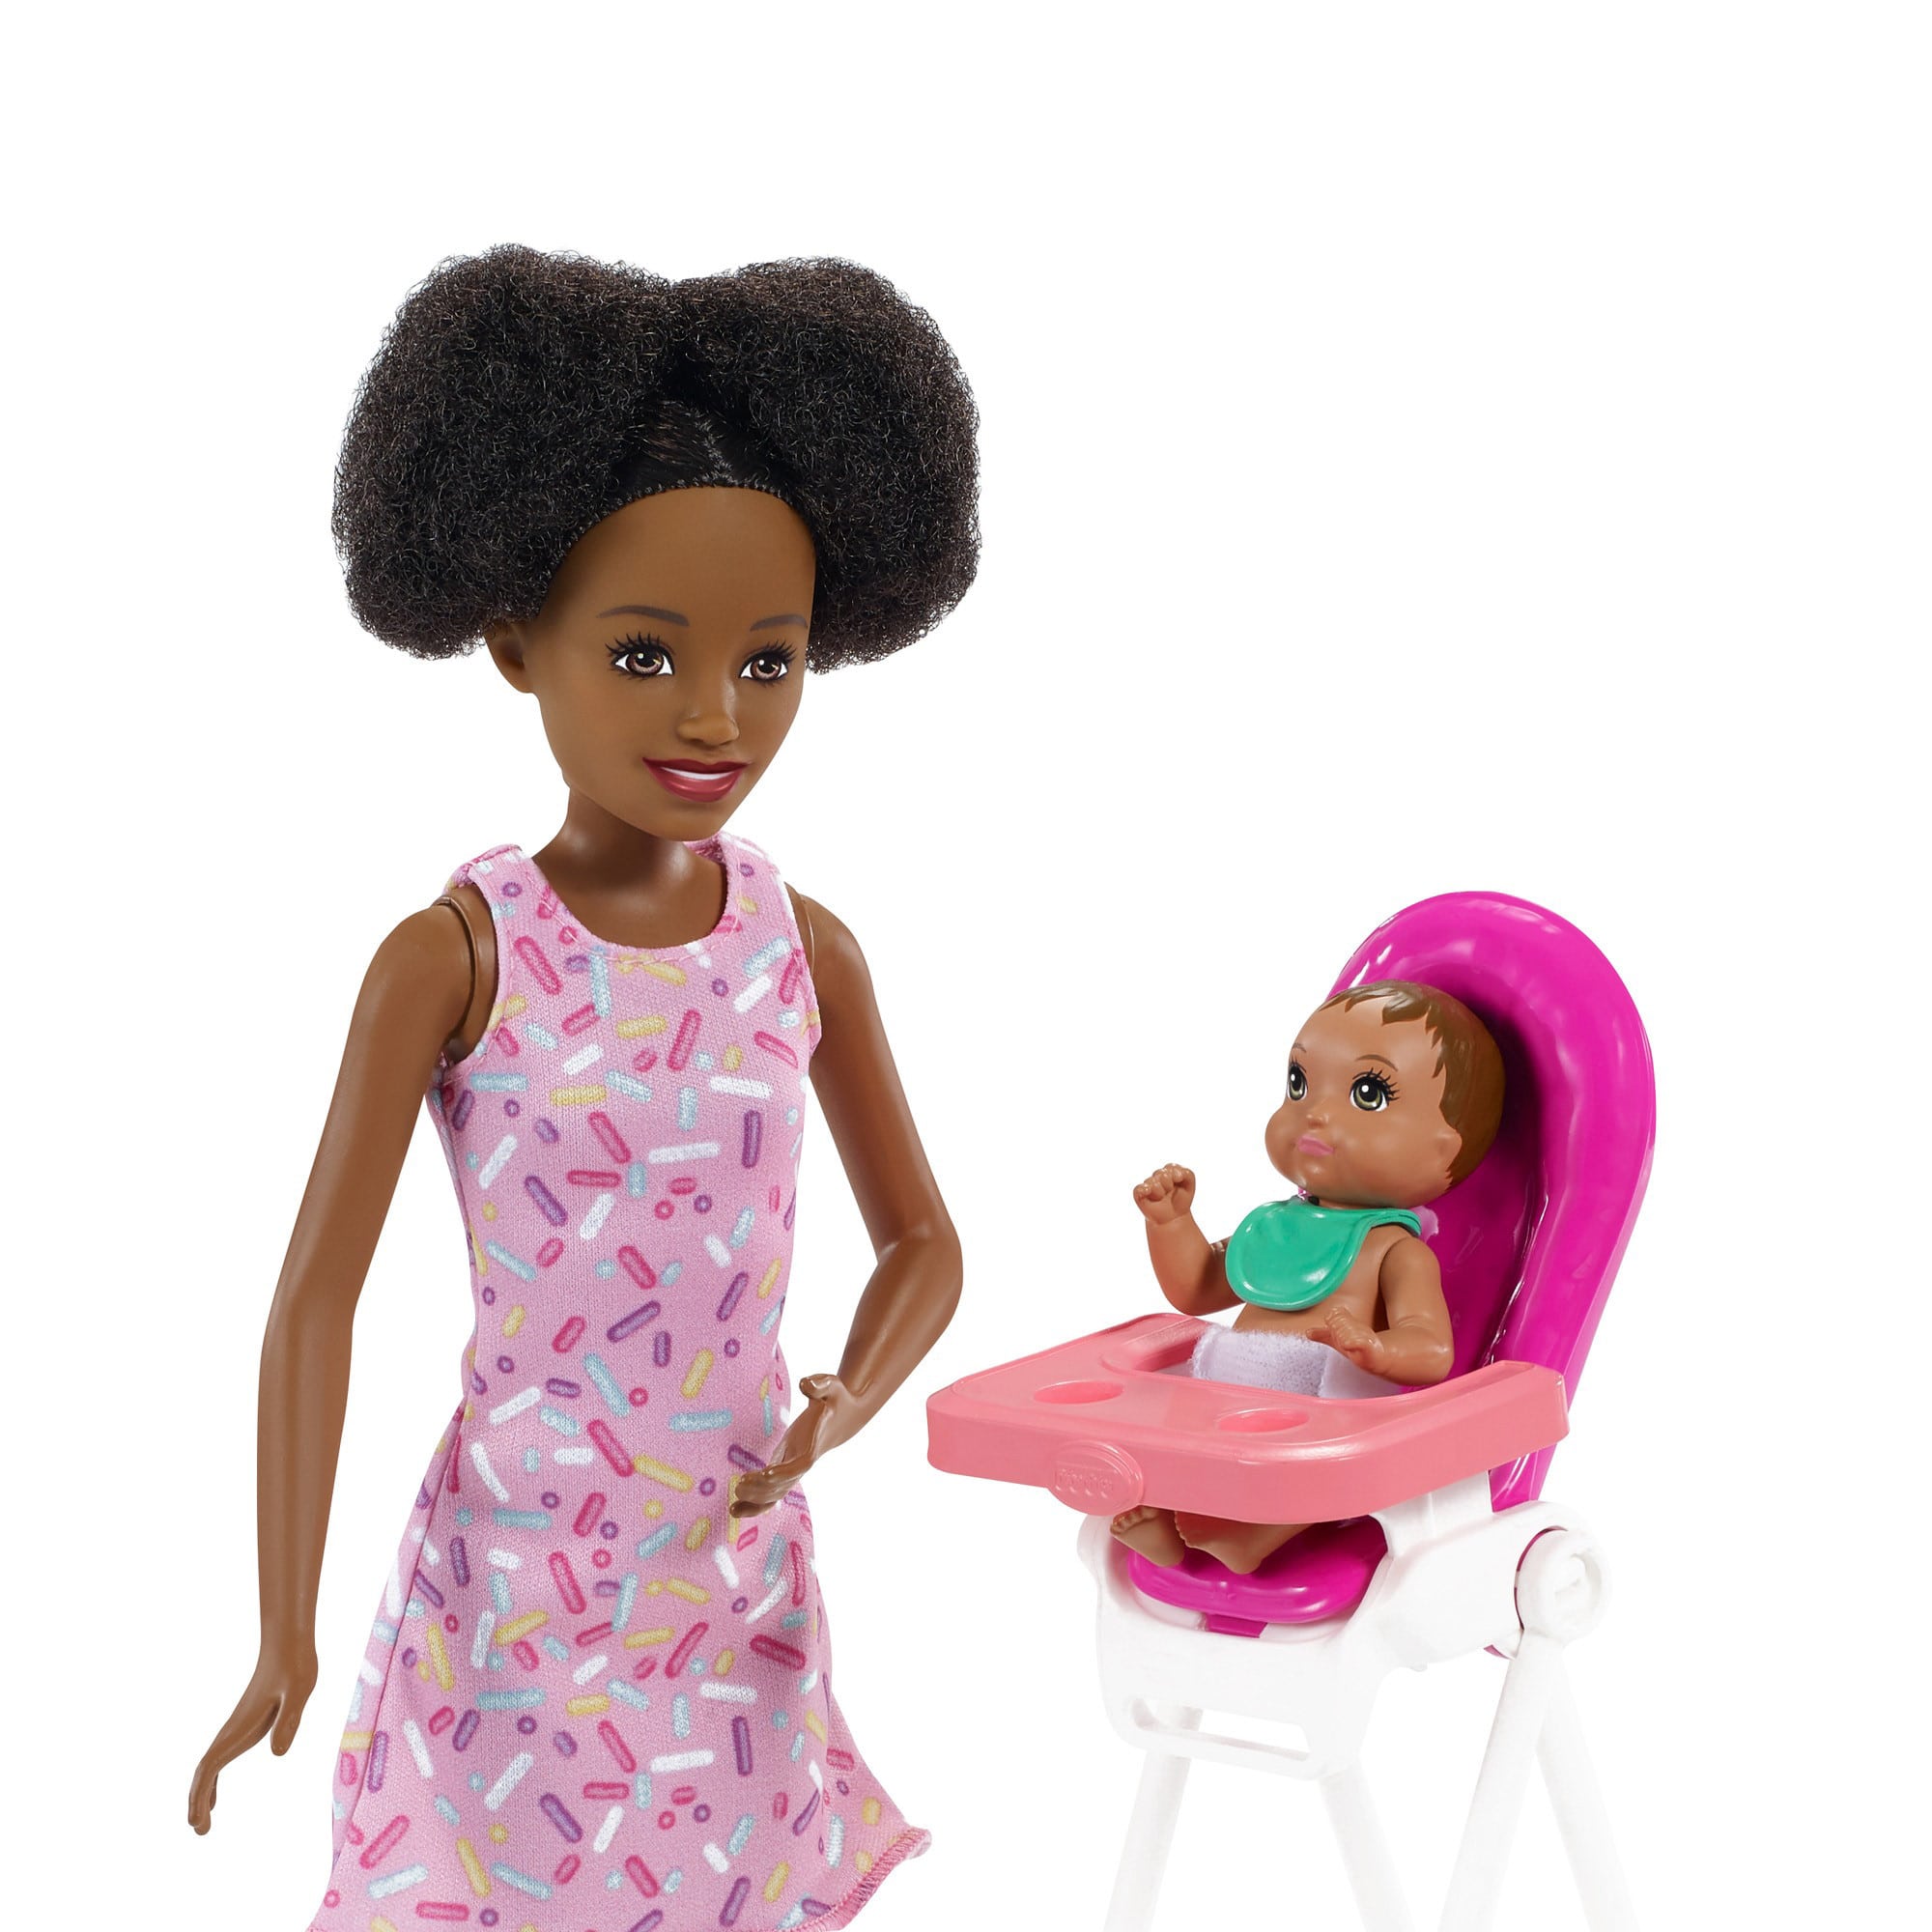 Barbie - Skipper Babysitters Inc - Party-Themed African American Doll Playset